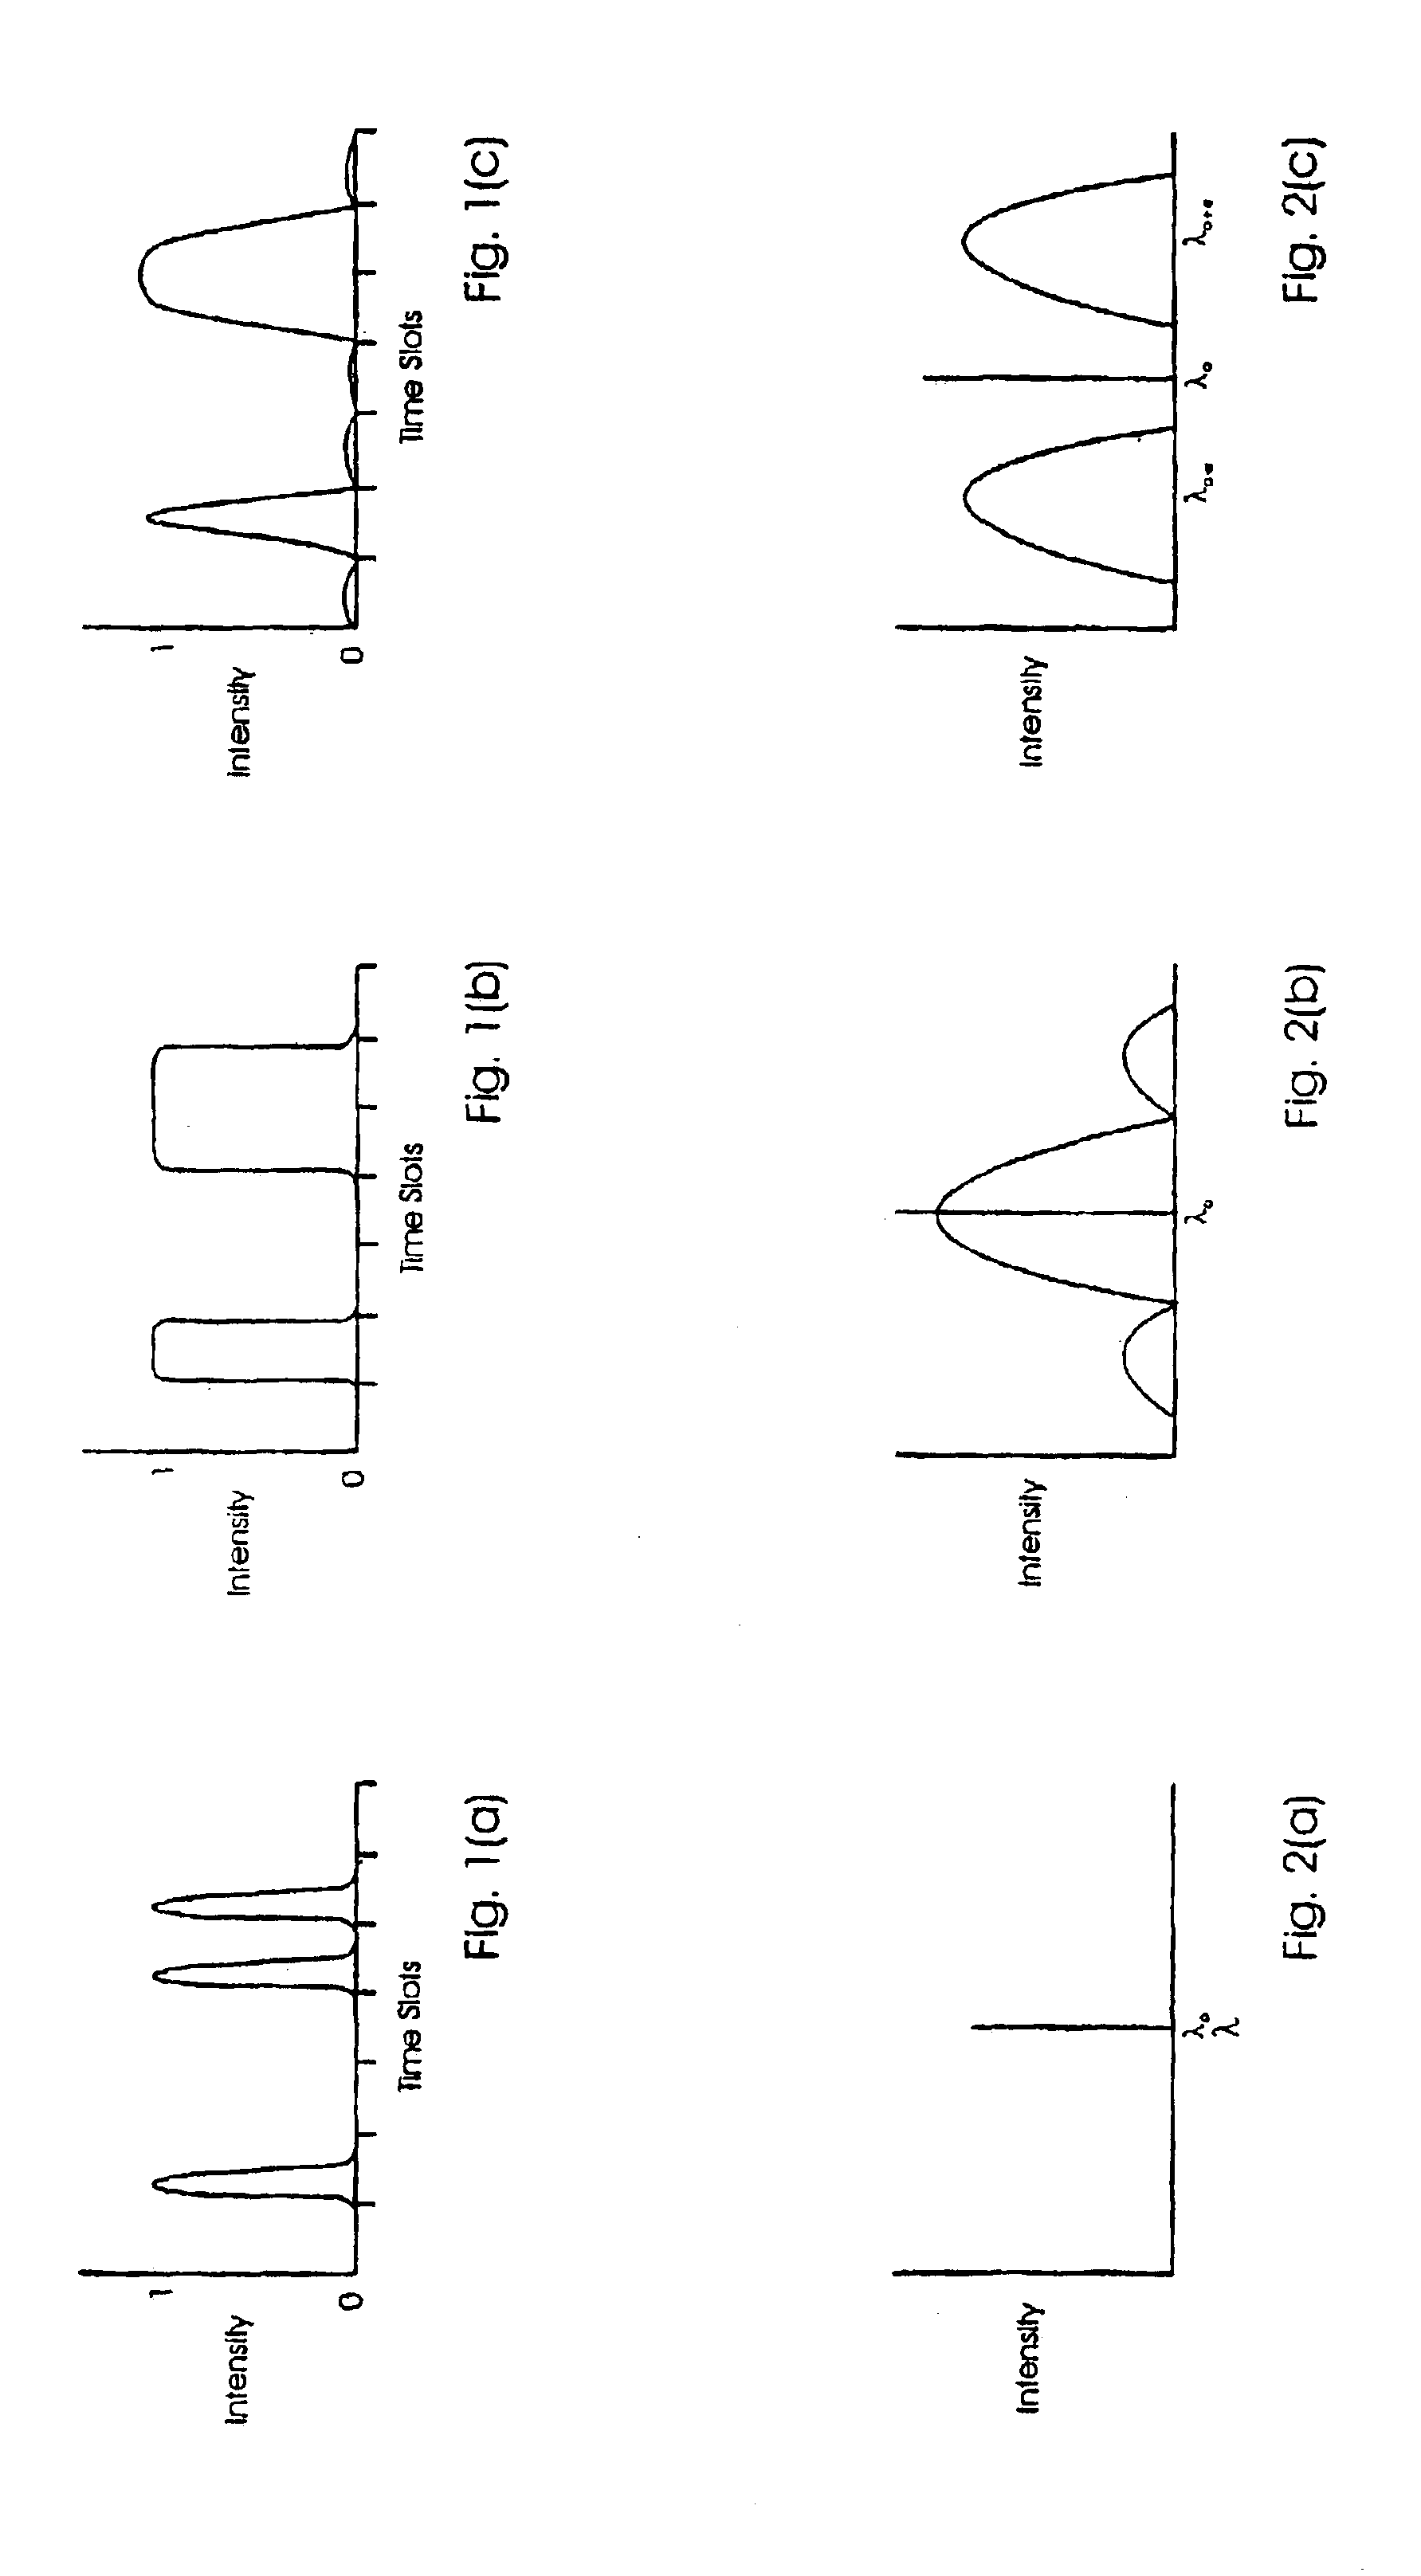 Optical transmission apparatuses, methods, and systems